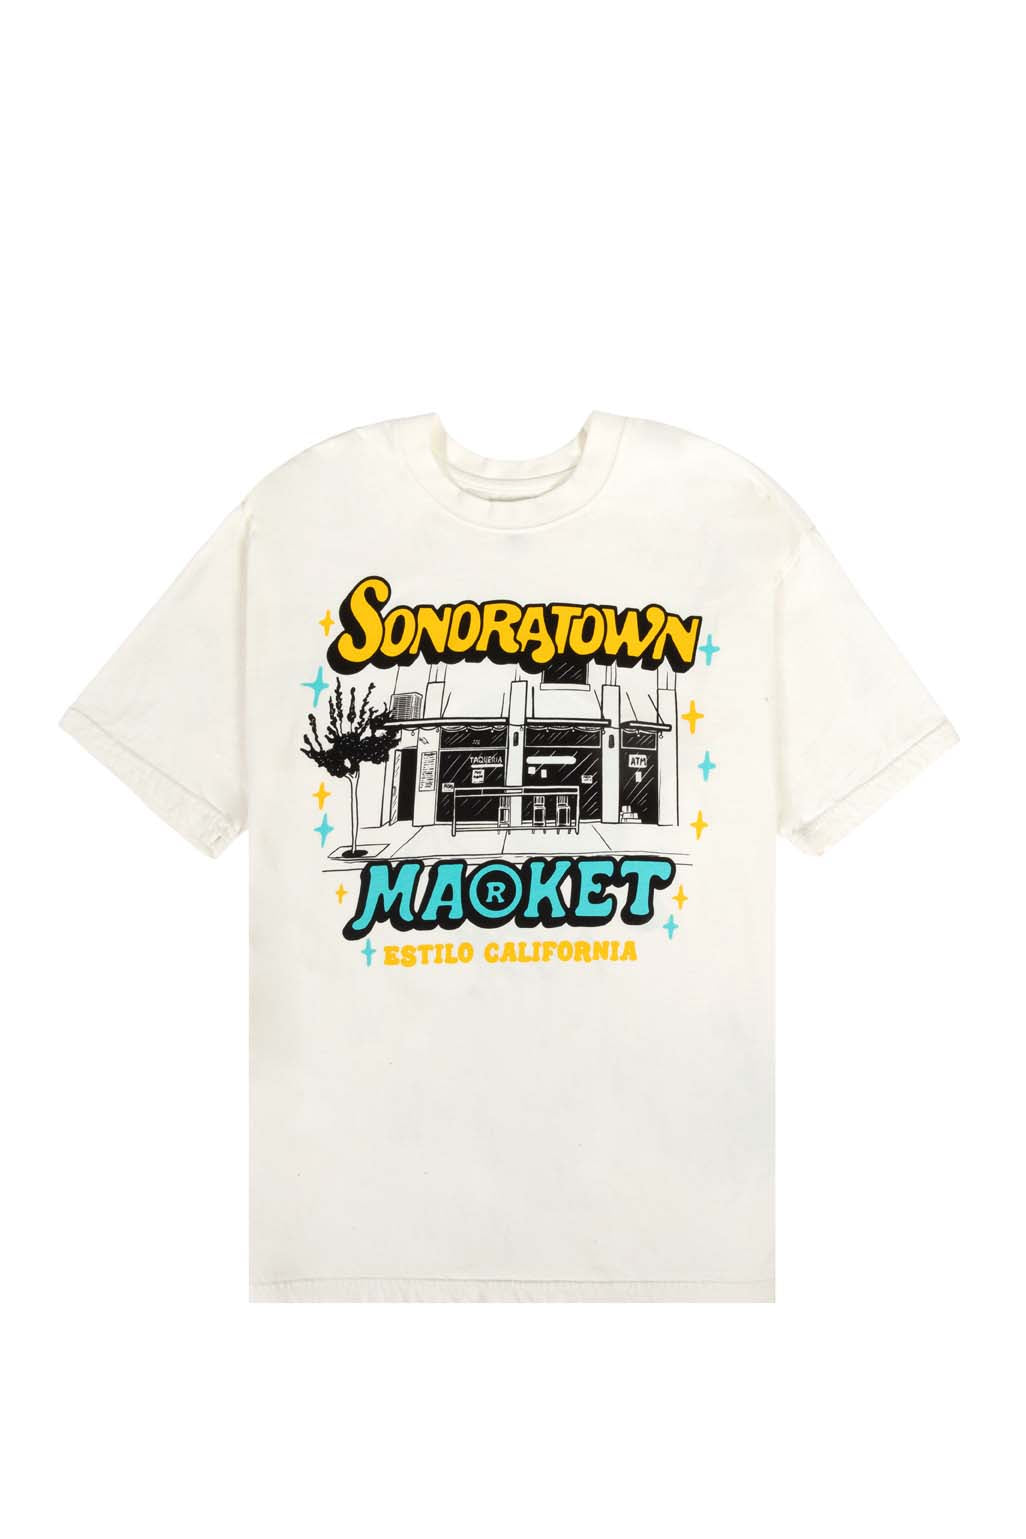 Sonoratown T-Shirt